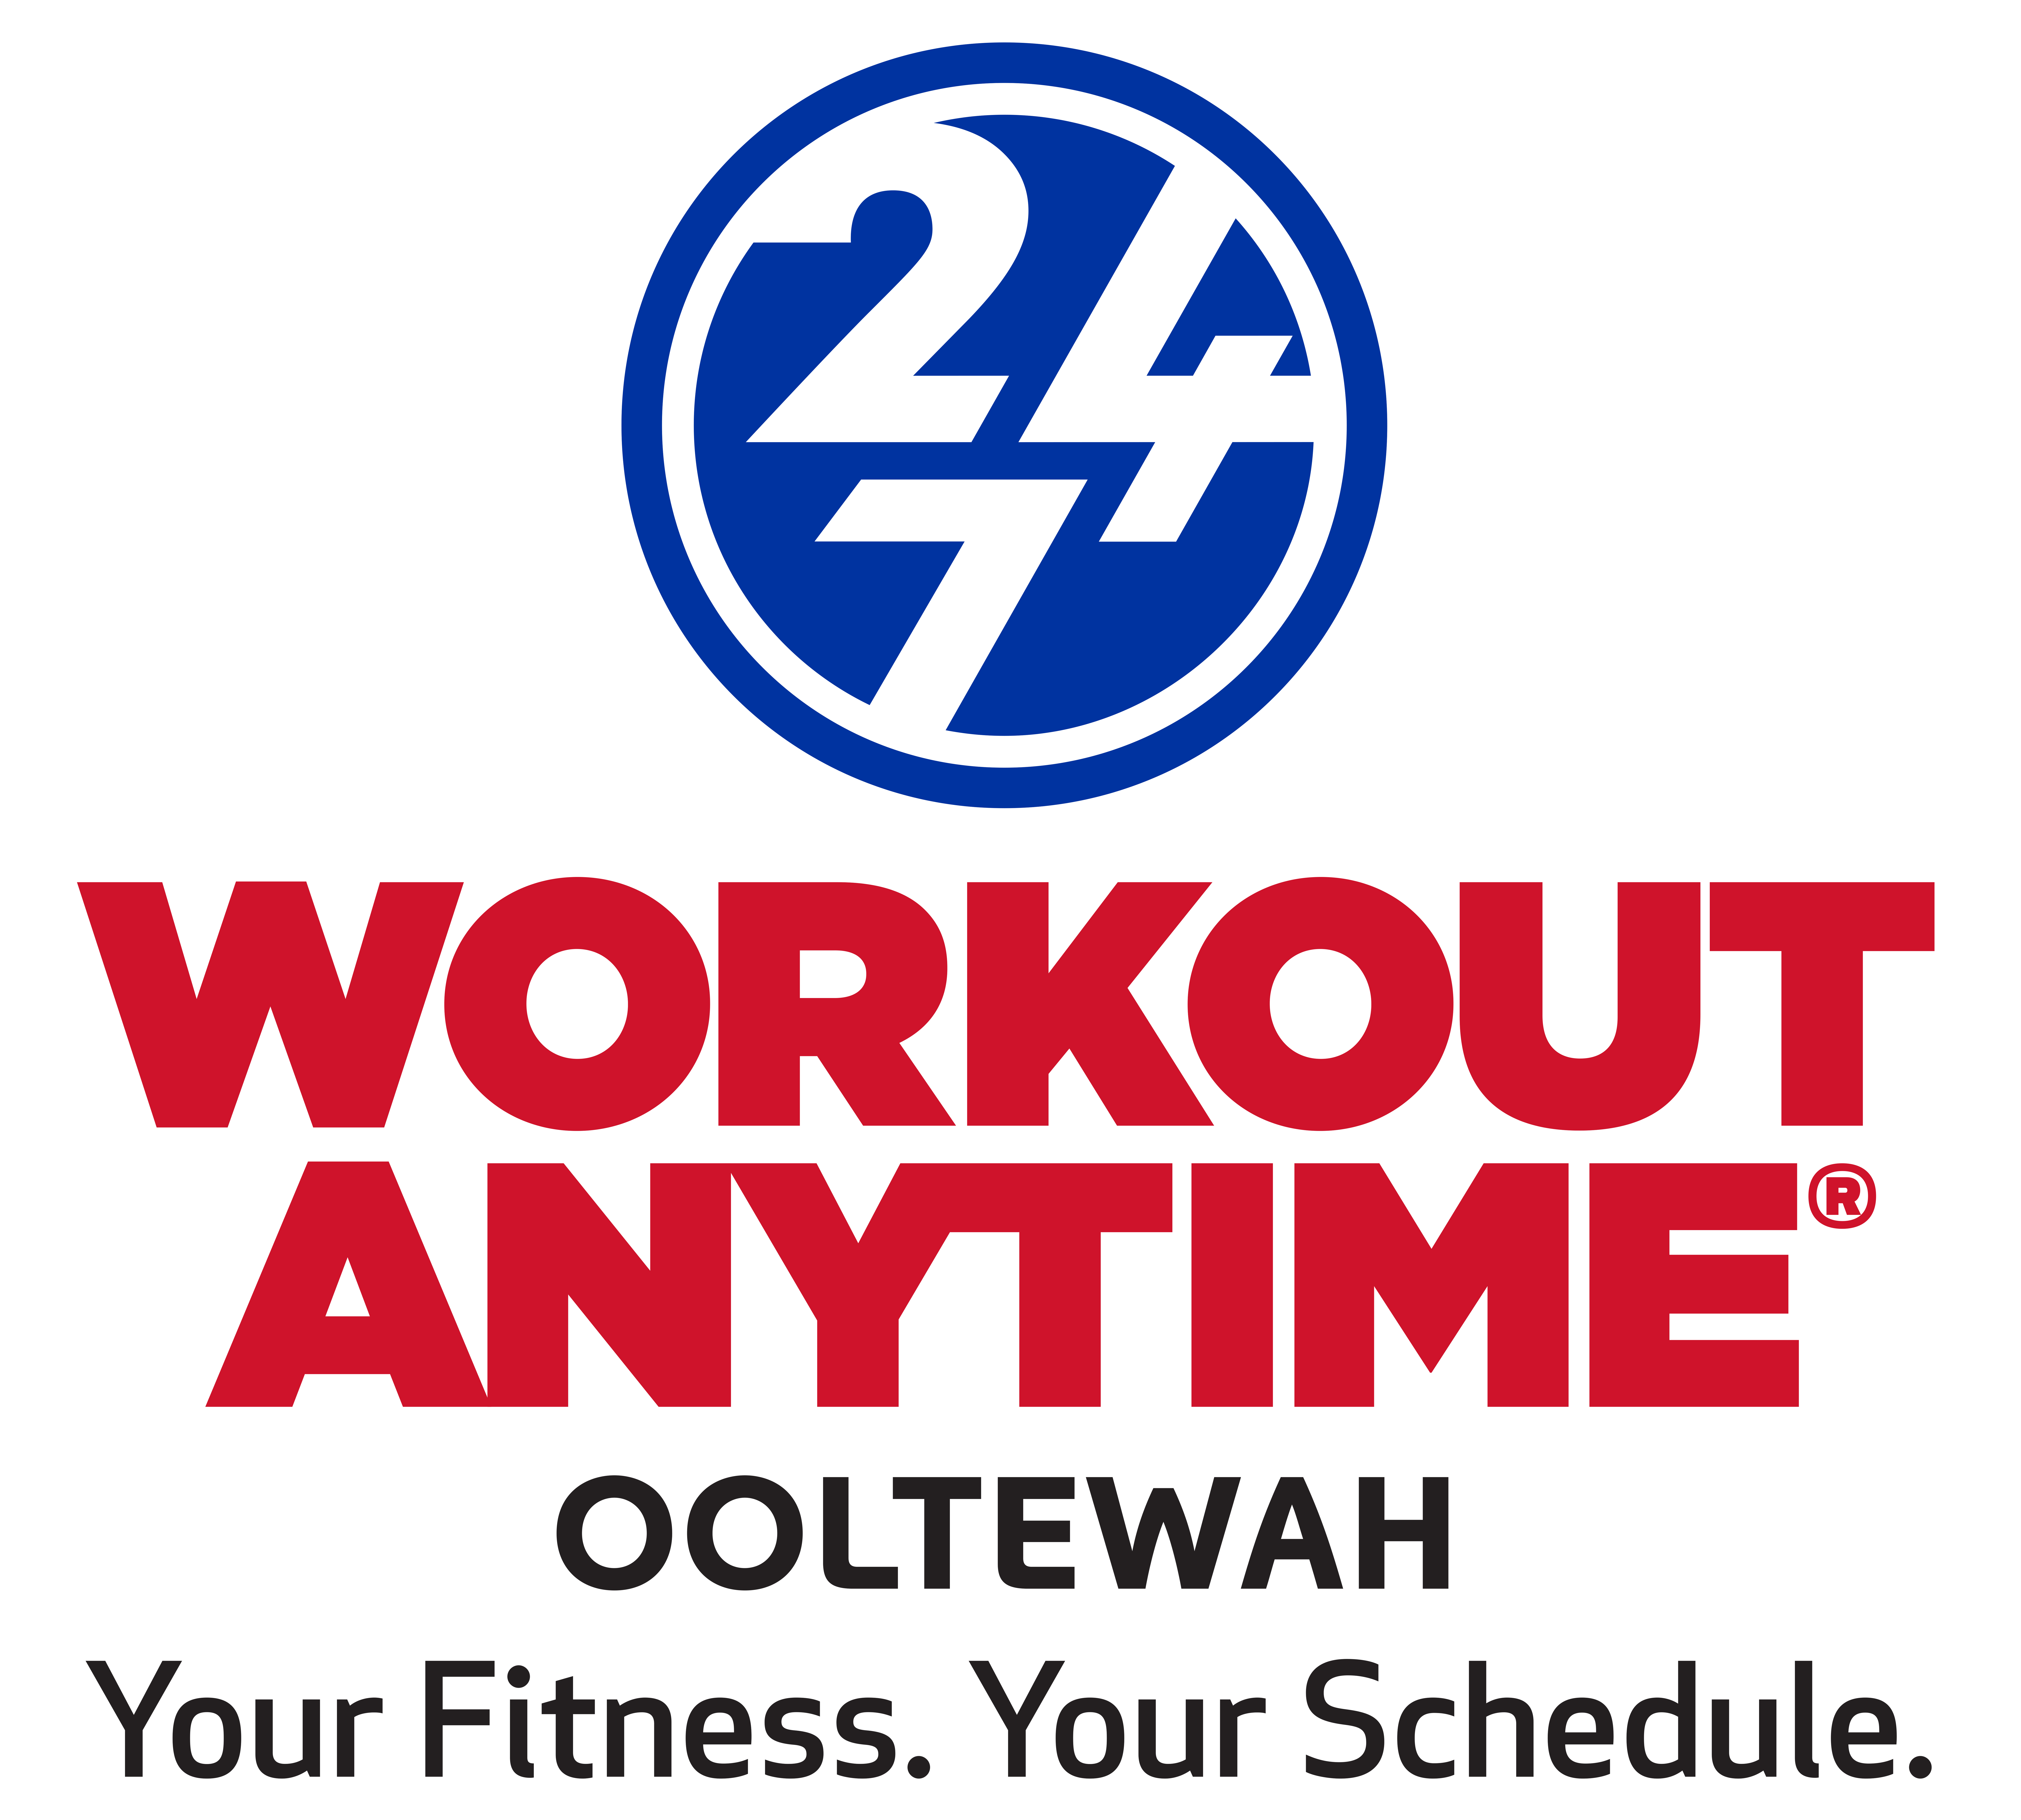 Workout Anytime Ooltewah